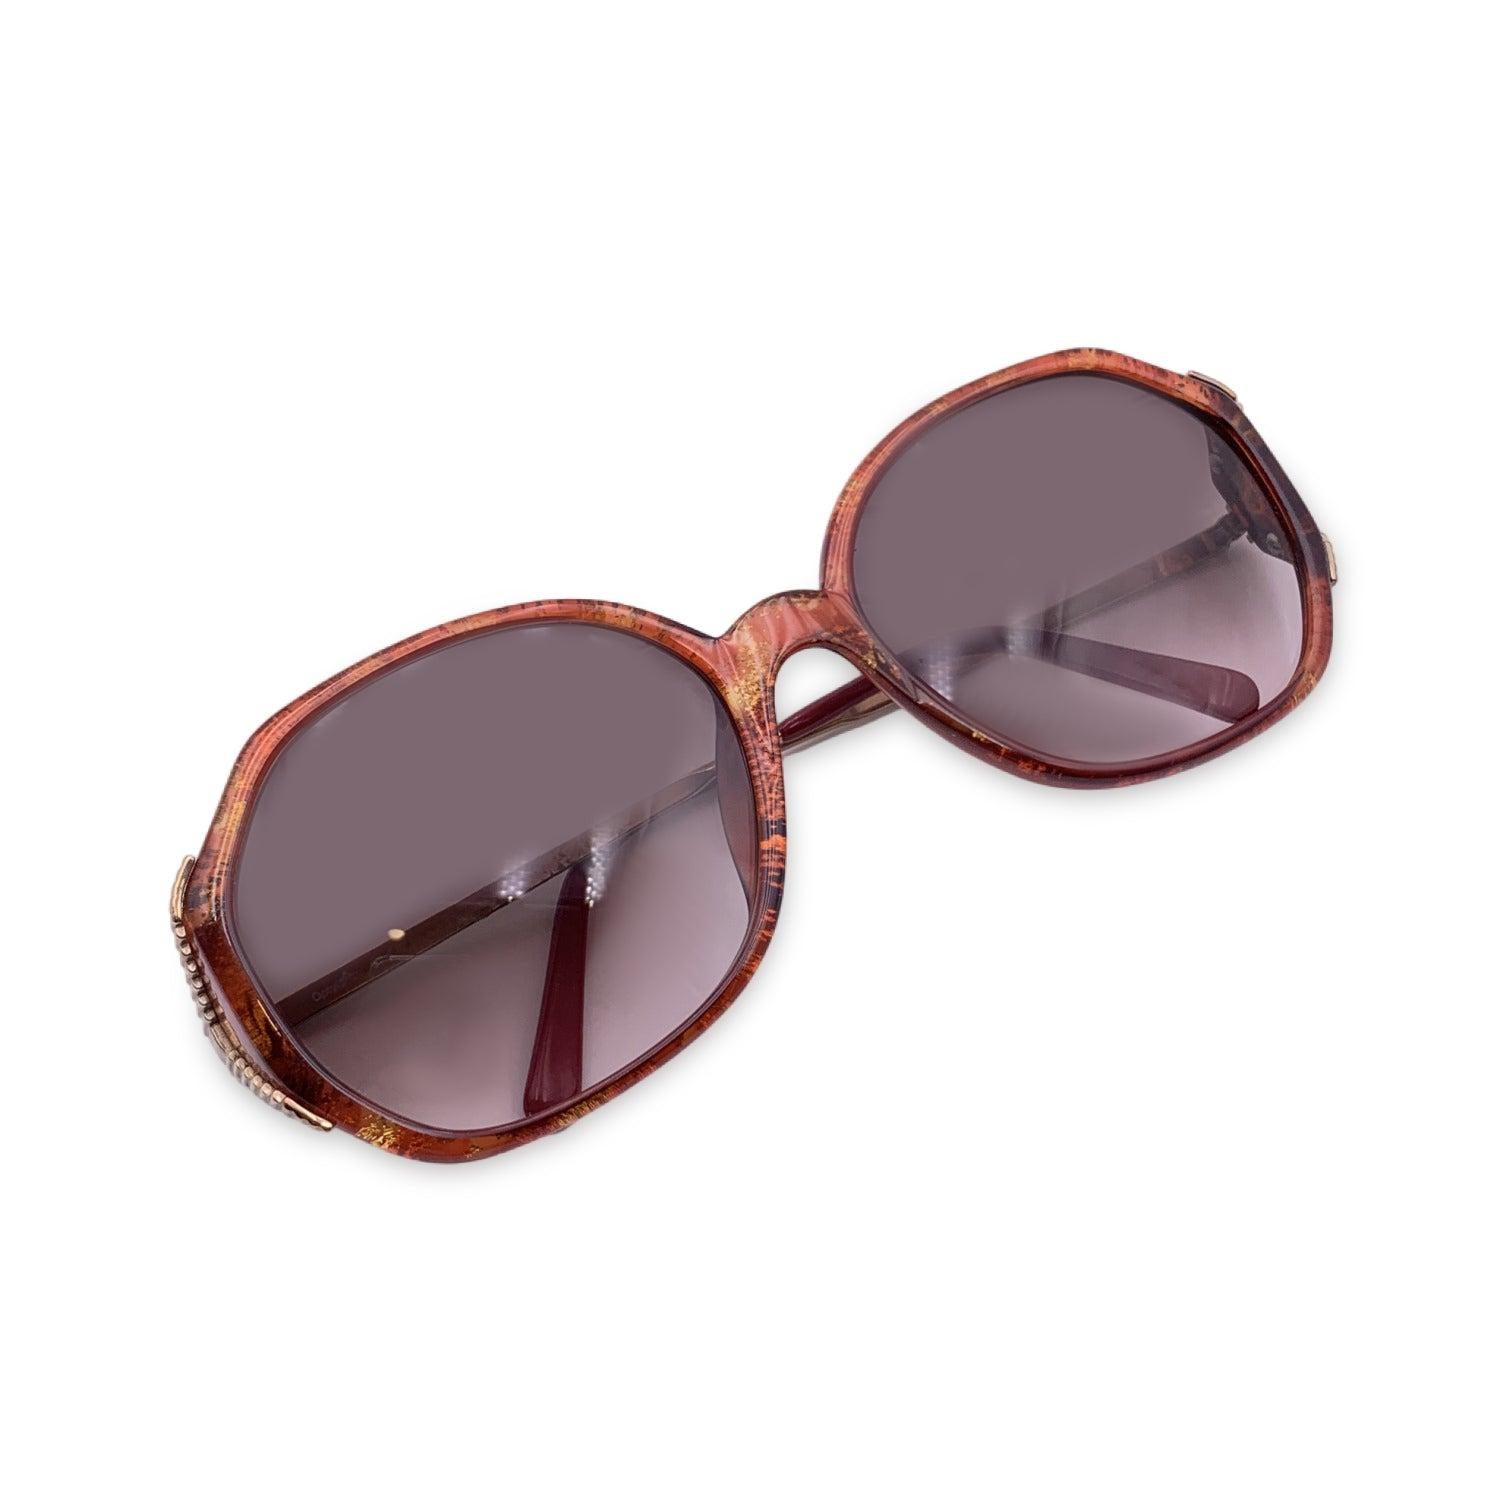 Vintage Christian Dior Women Sunglasses, Mod. 2527 30 Optyl. Size: 58/18 130mm. Burgundy acetate frame with gold metal finish. CD logo on temples . 100% Total UVA/UVB protection. Brown gradient lenses. Details MATERIAL: Plastic COLOR: Burgundy